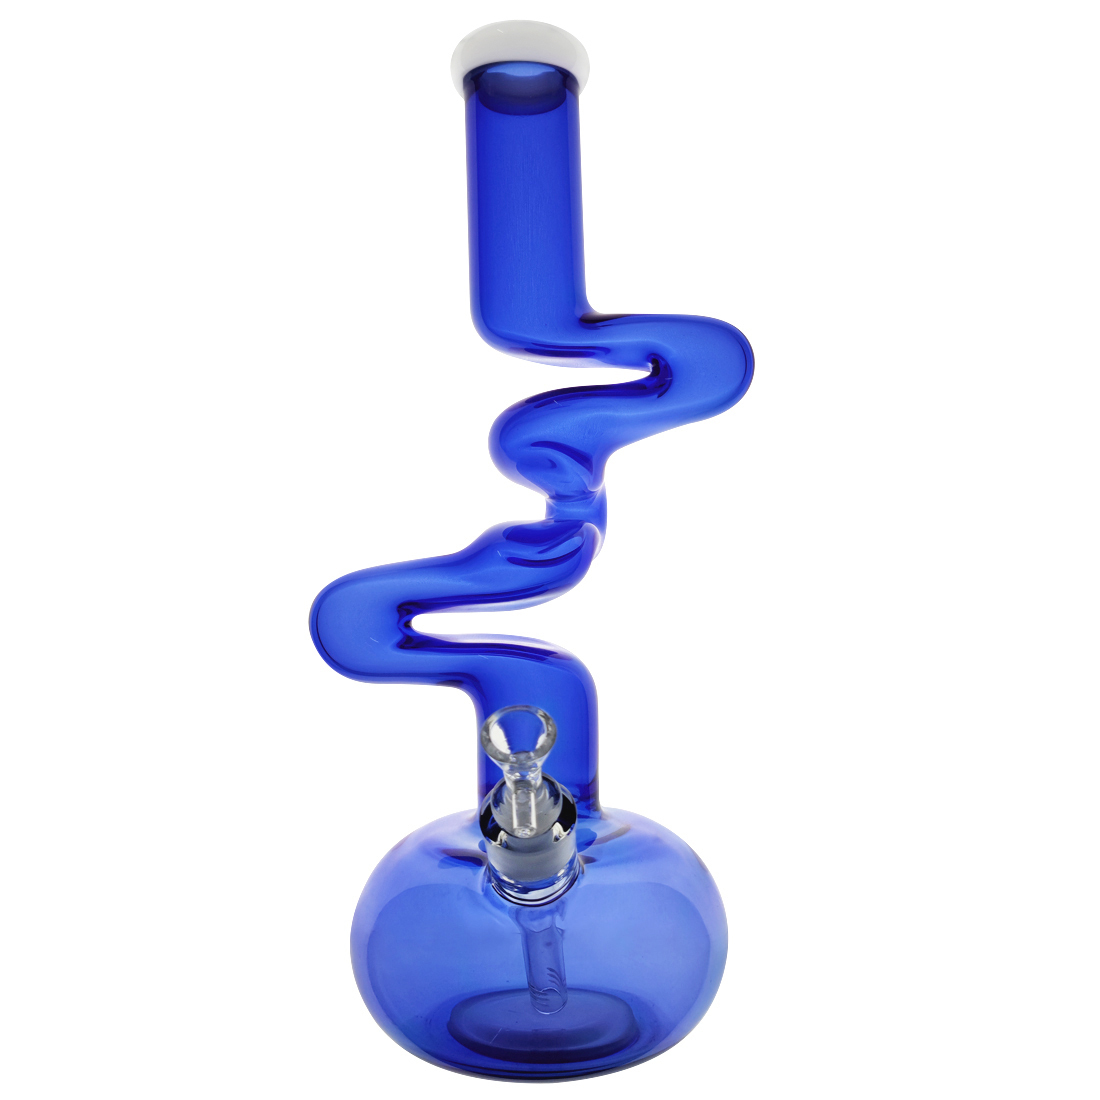 Soloud & Chopped Web Celebrity Same Style | Unique Big Glass Zong Bong With Round Base